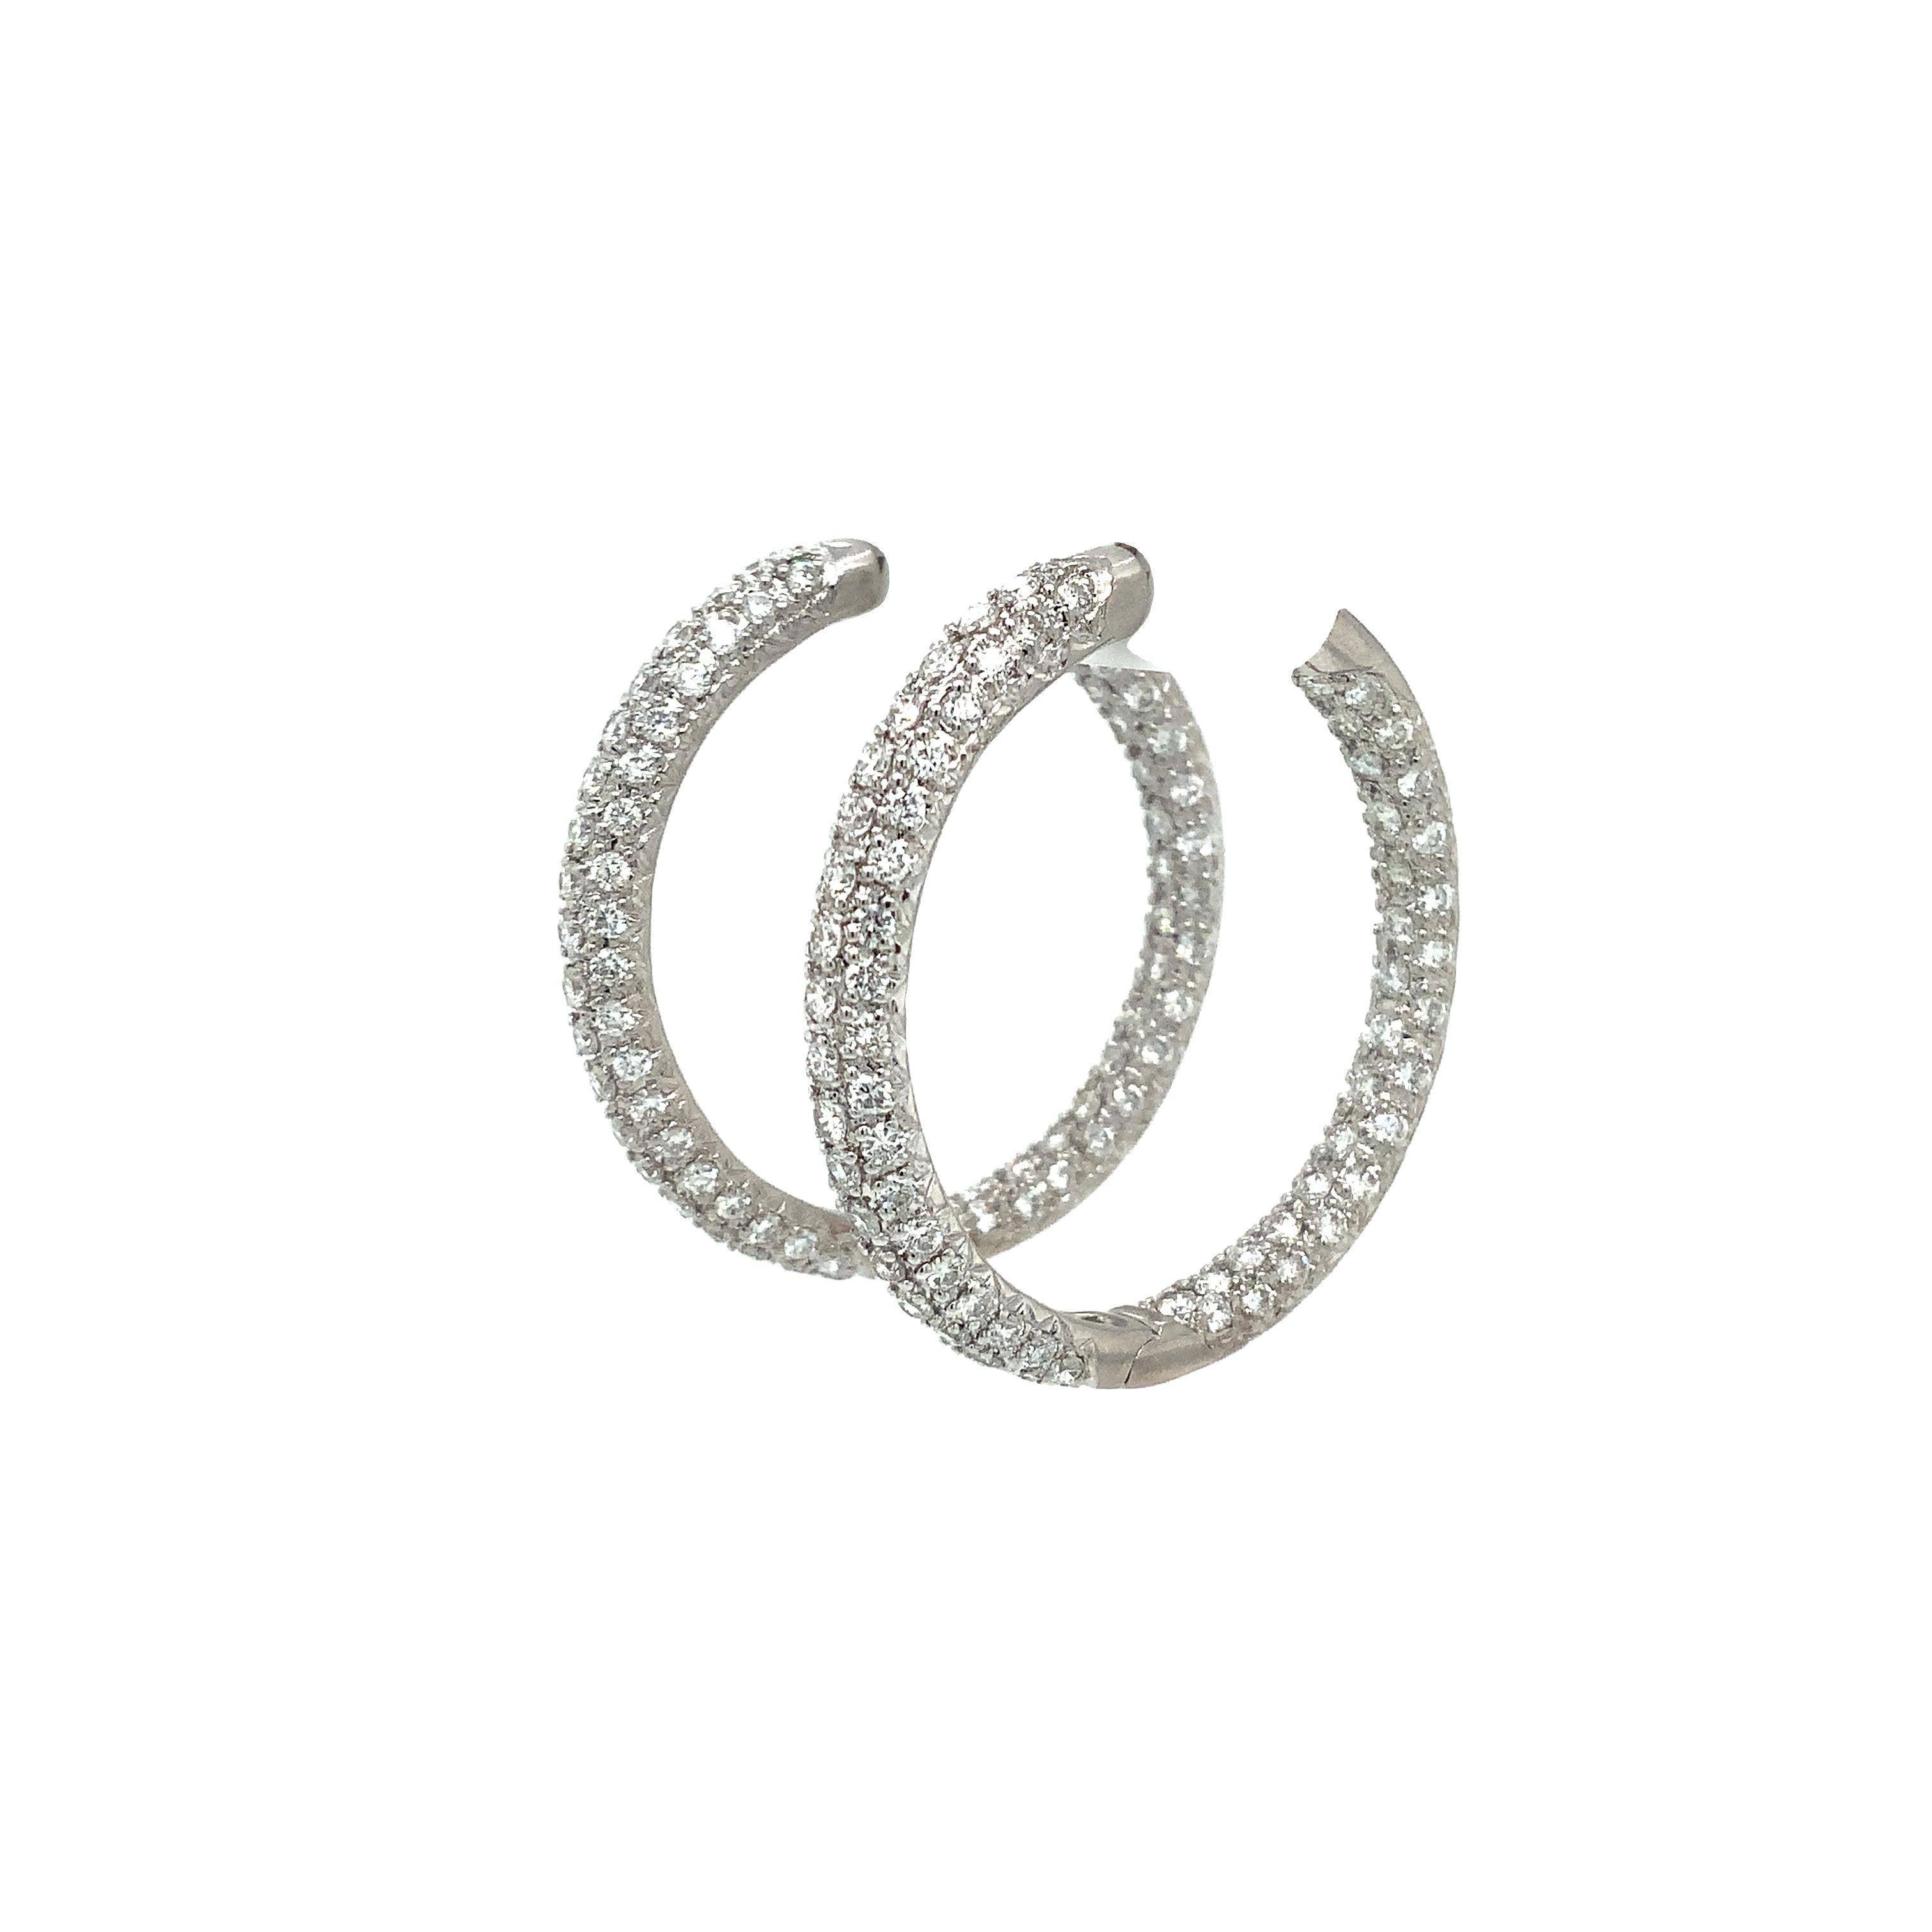 Pavé 3 Row Round Inside -Outside Diamond Hoop Earrings Set in 18K White Gold  In Excellent Condition For Sale In Los Gatos, CA